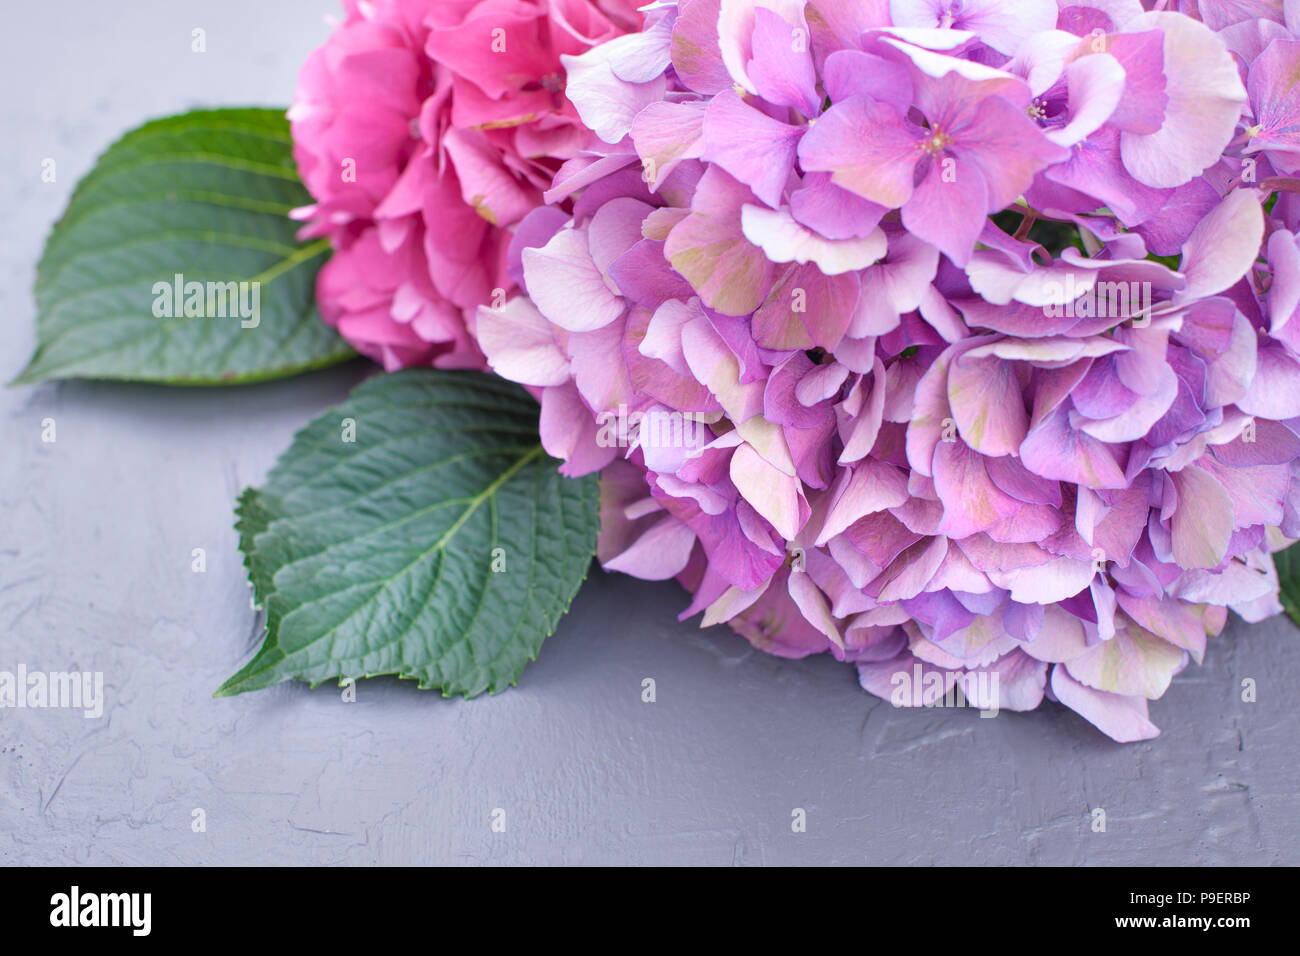 Close Up Of A Pink Hydrangea Macrophylla In Bloom Stock Photo